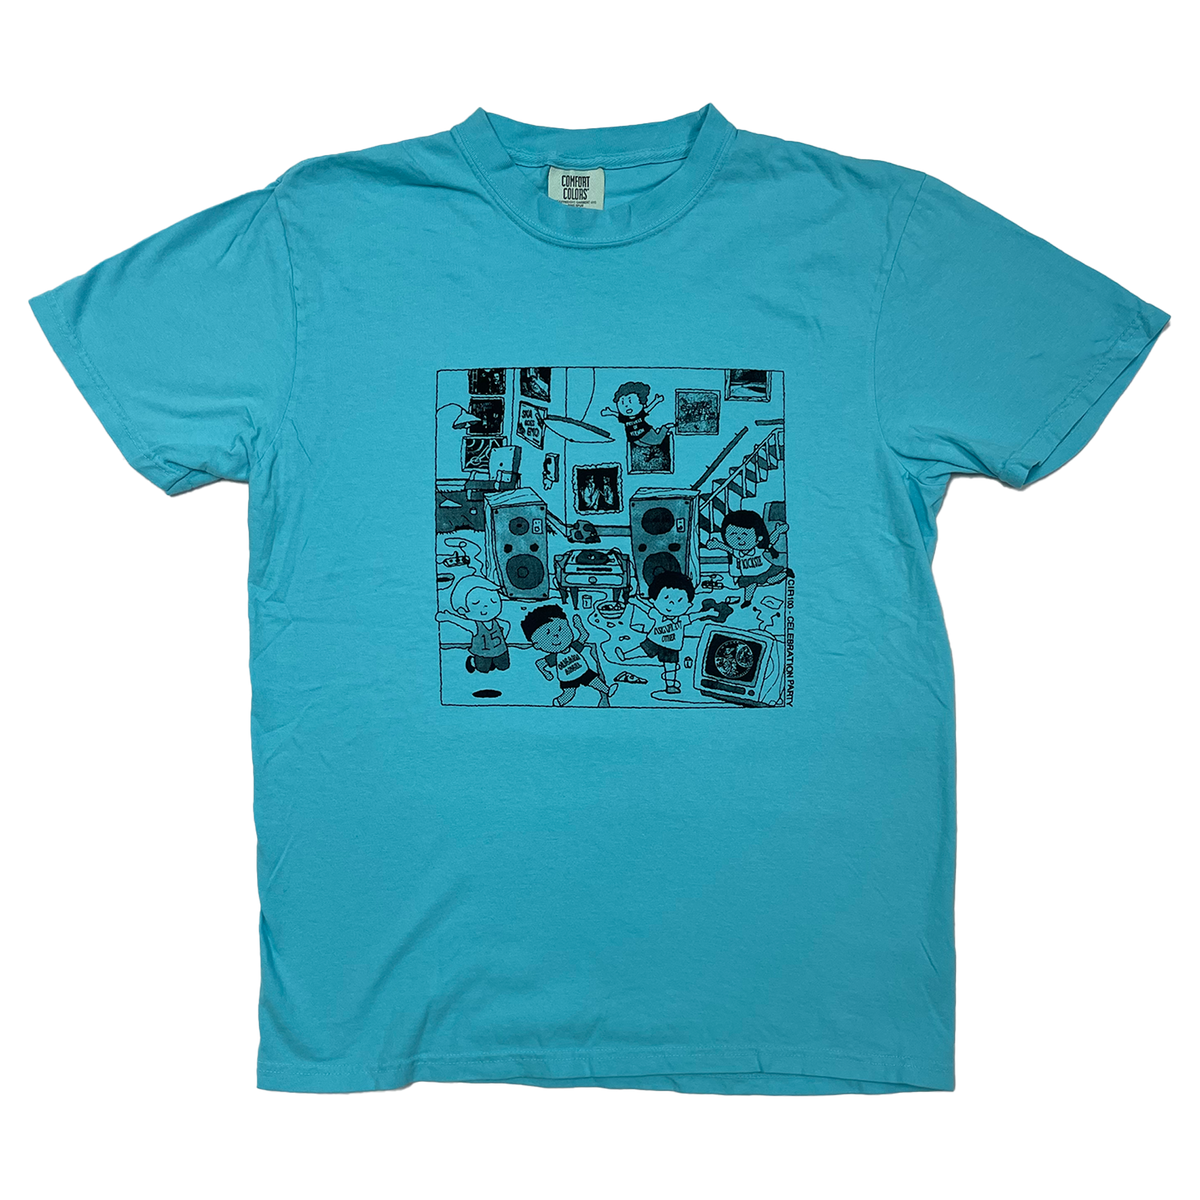 Counter Intuitive 100th Shirt - Blue